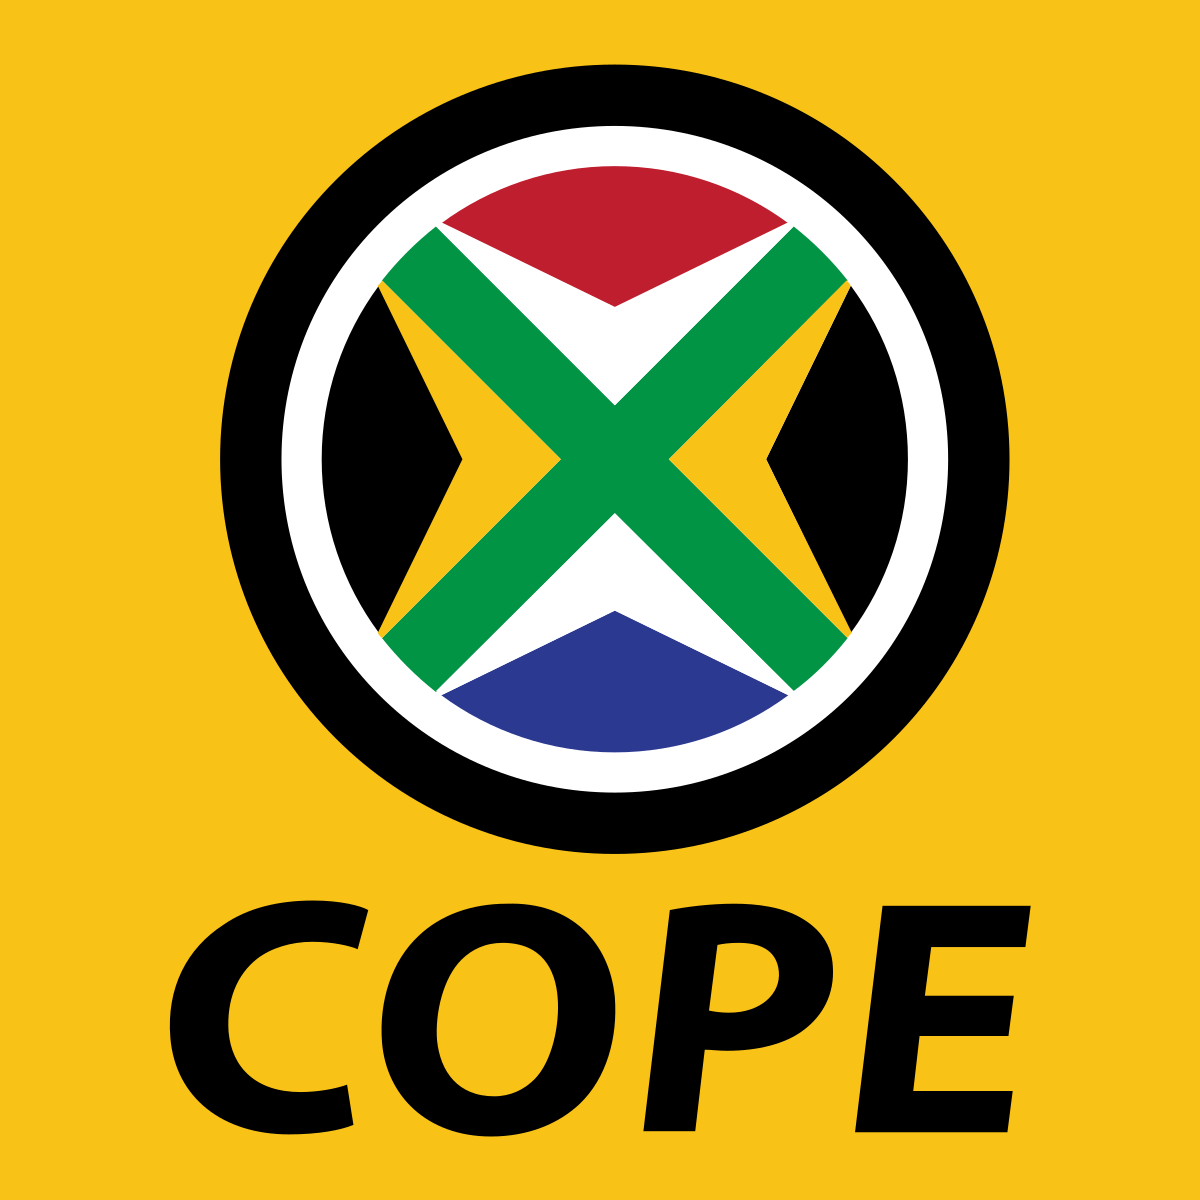 Peoples Telephone Logo - Congress of the People (South African political party)